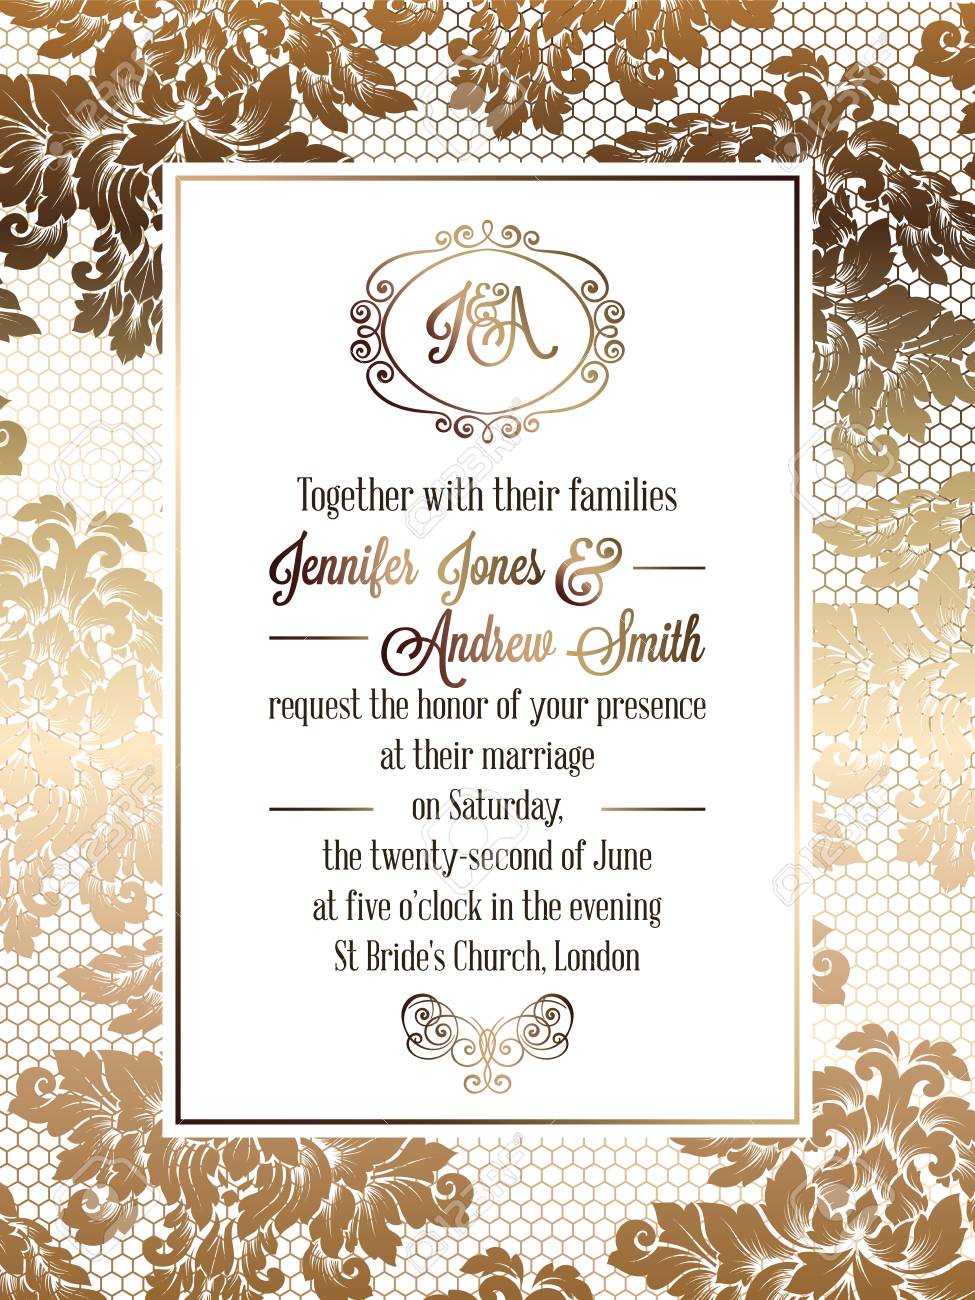 Vintage Baroque Style Wedding Invitation Card Template.. Elegant.. Intended For Free E Wedding Invitation Card Templates